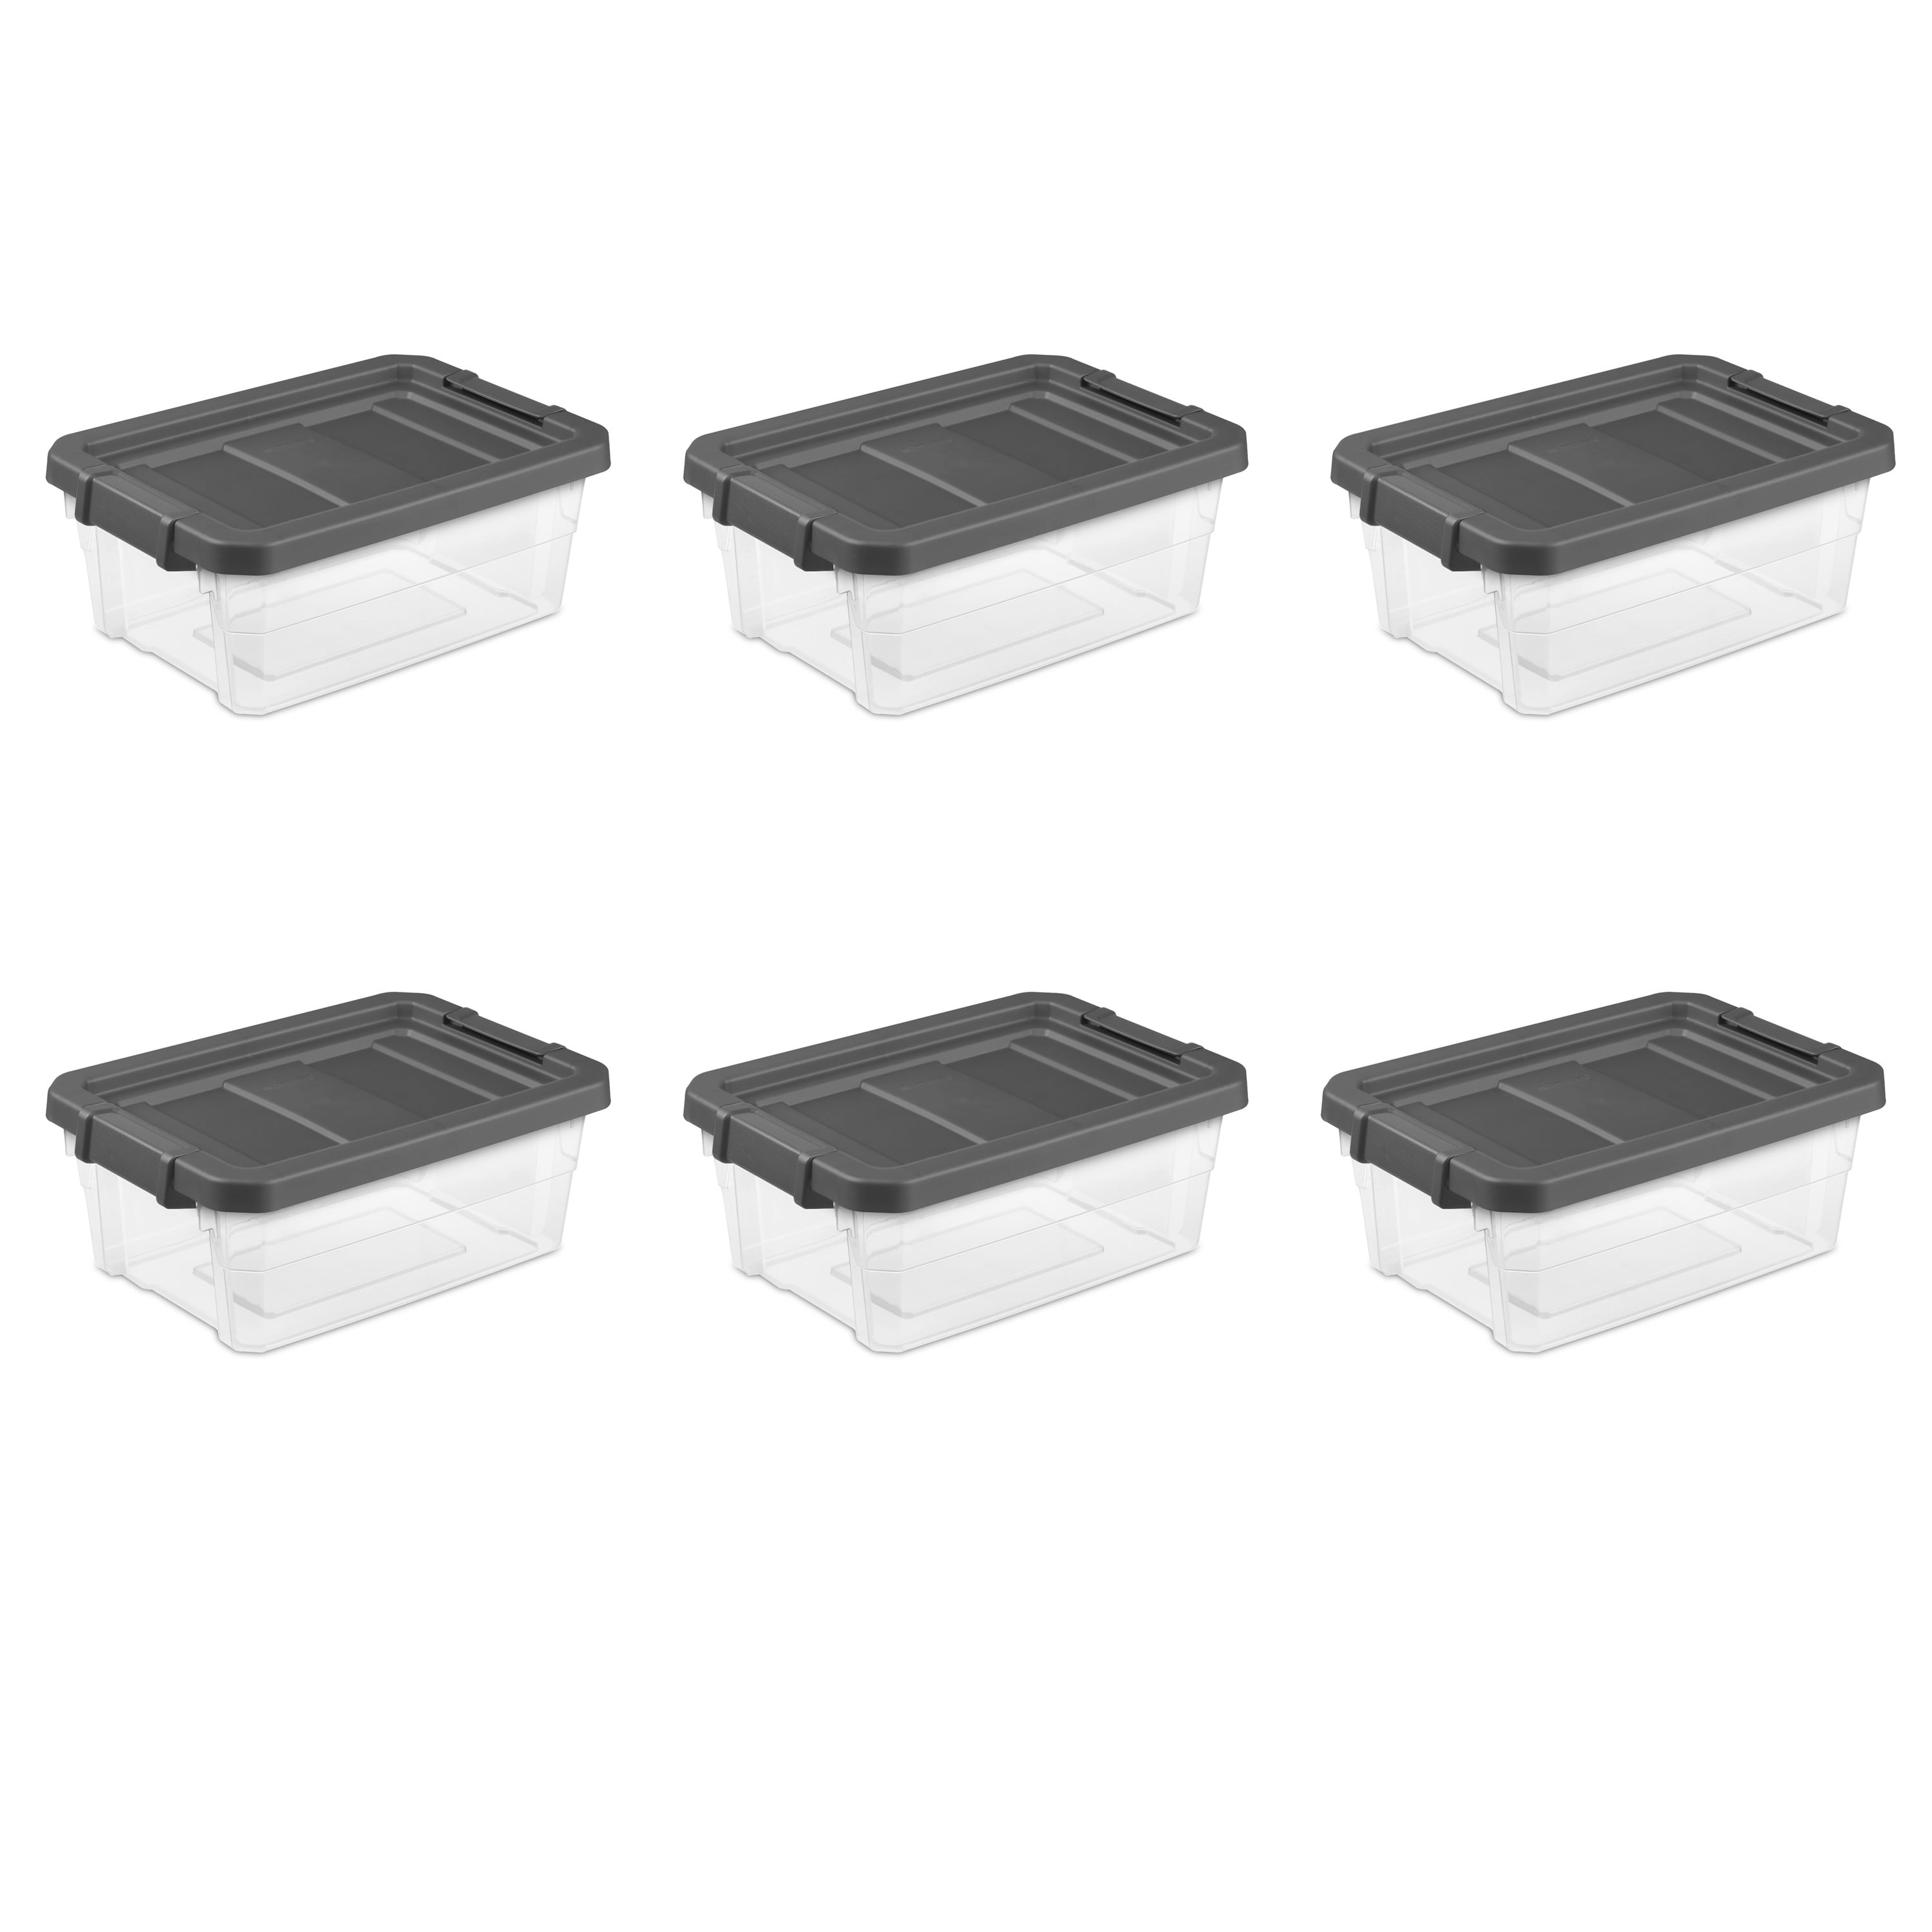 Sterilite 16 Qt Clear Plastic Stacking Storage Containers w/ Gray